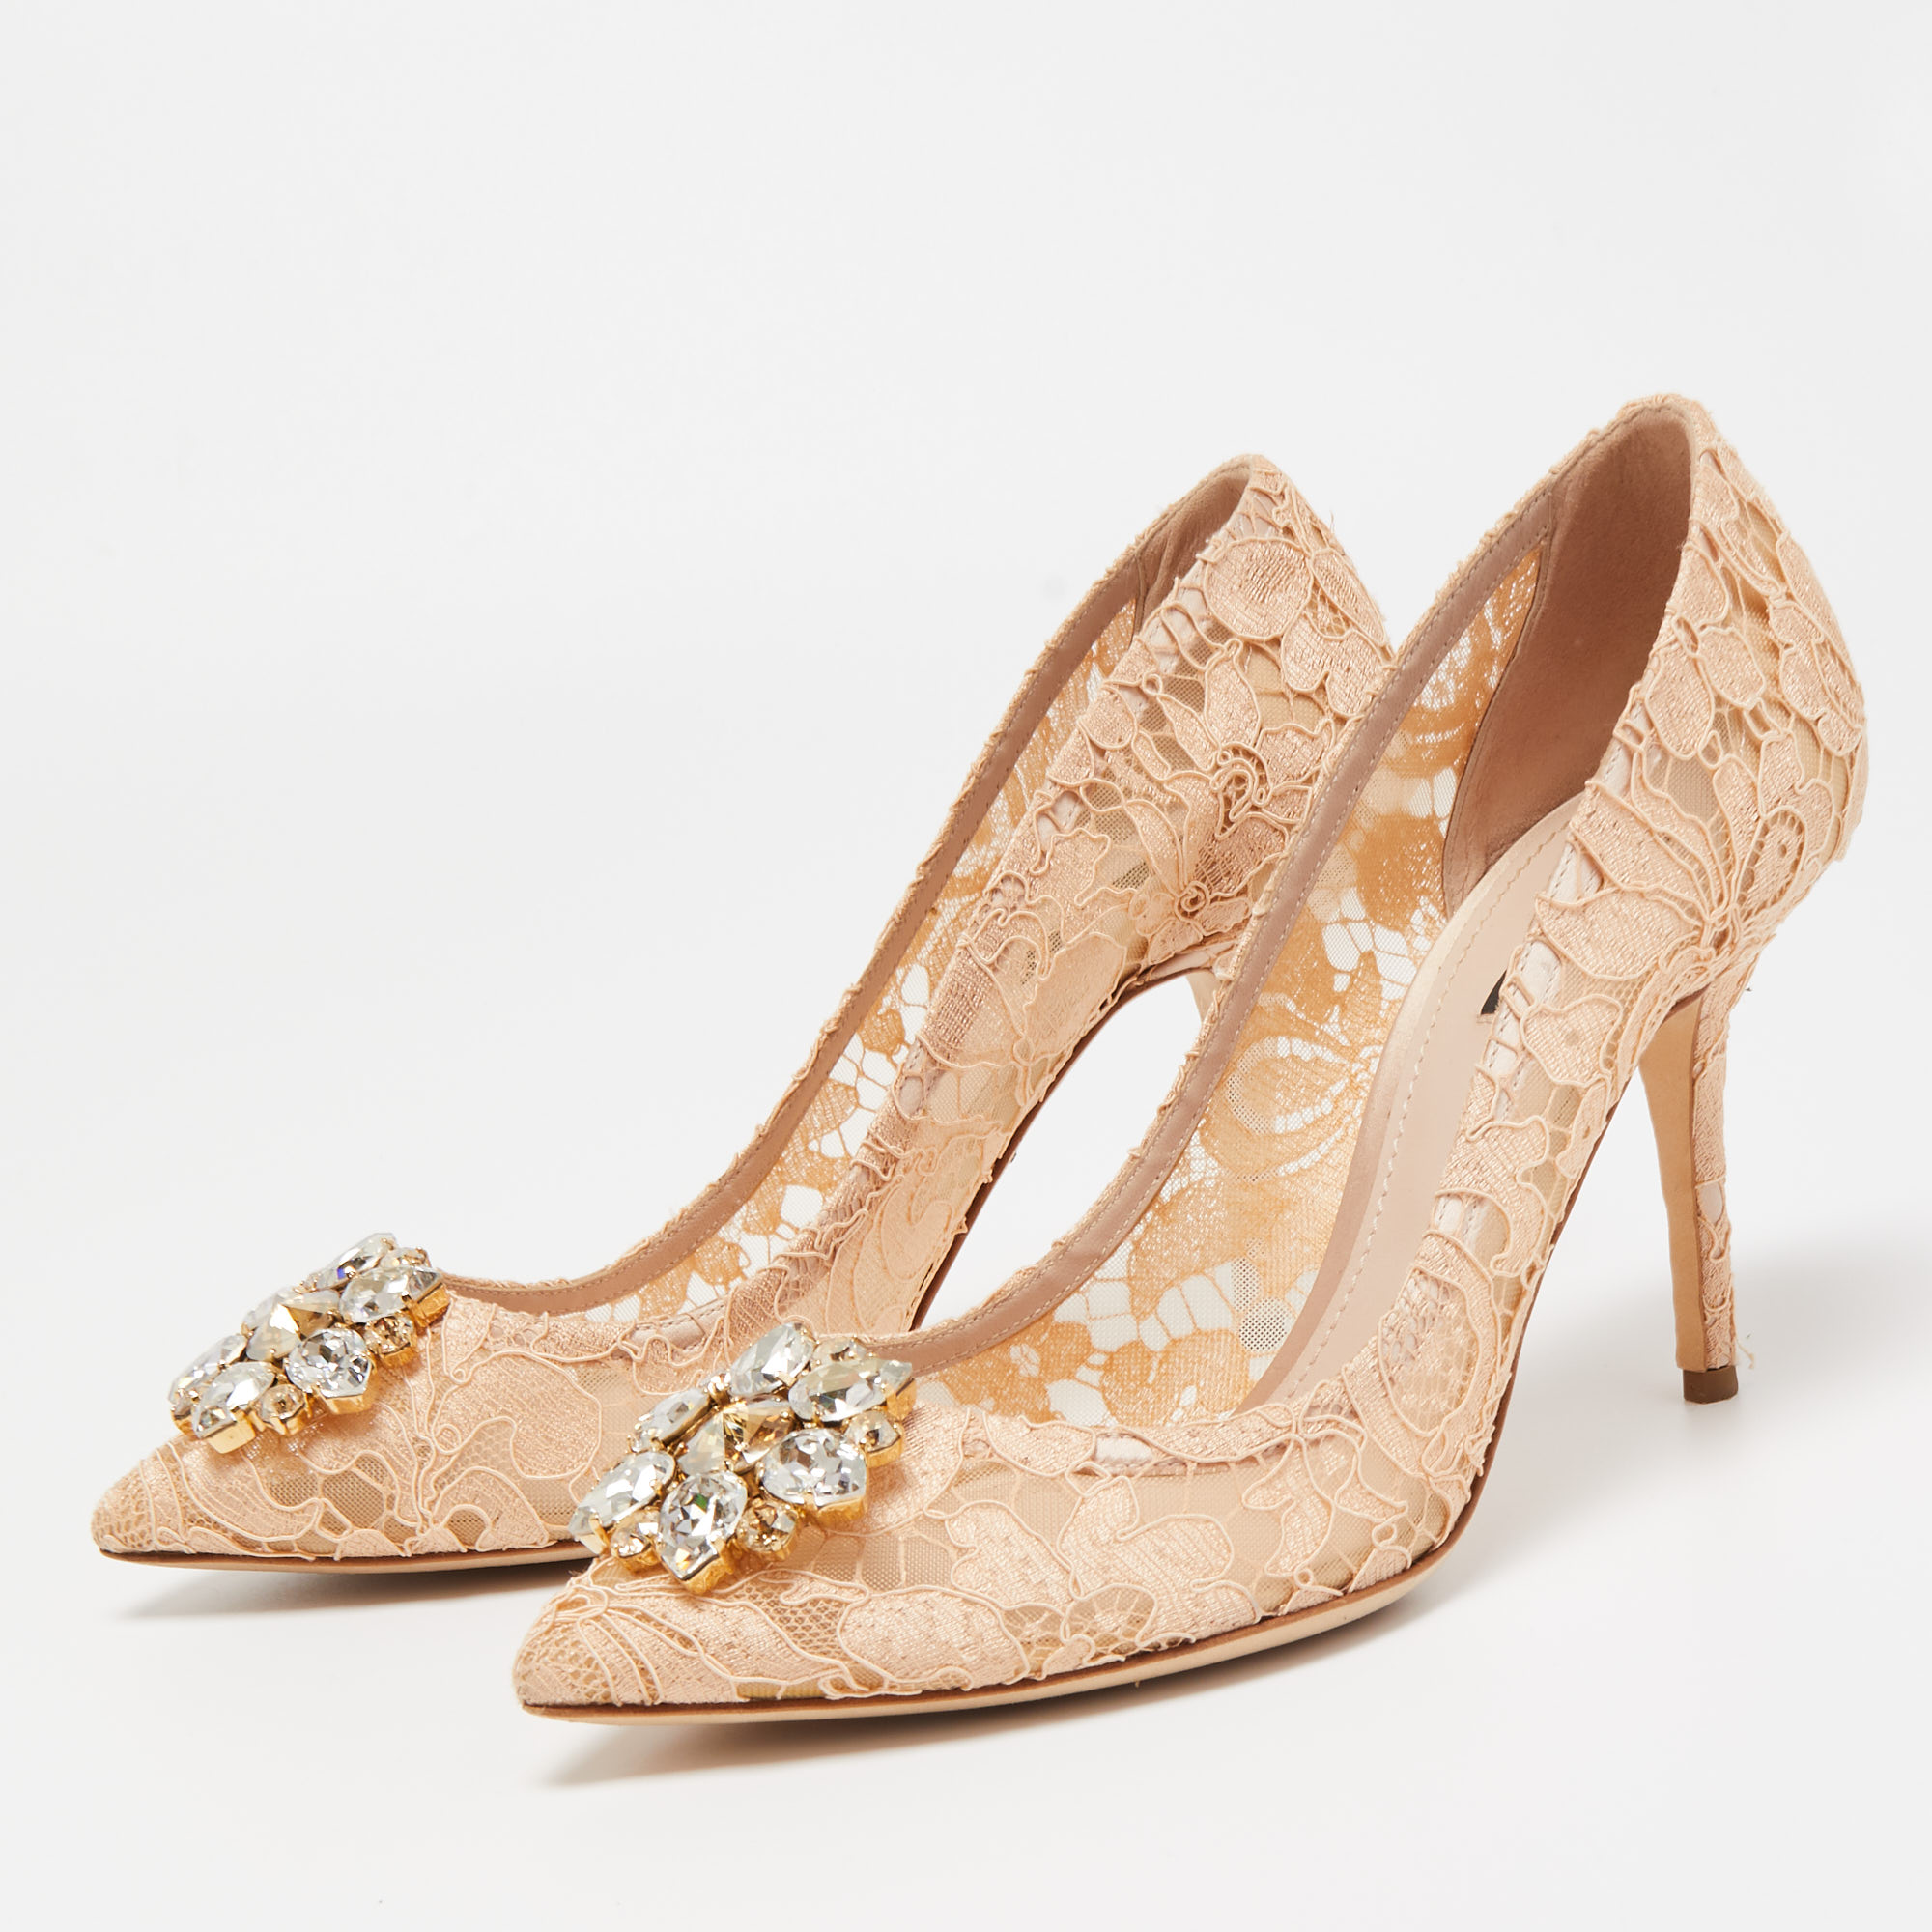 

Dolce & Gabbana Beige Lace Bellucci Crystal Embellished Pointed Toe Pumps Size